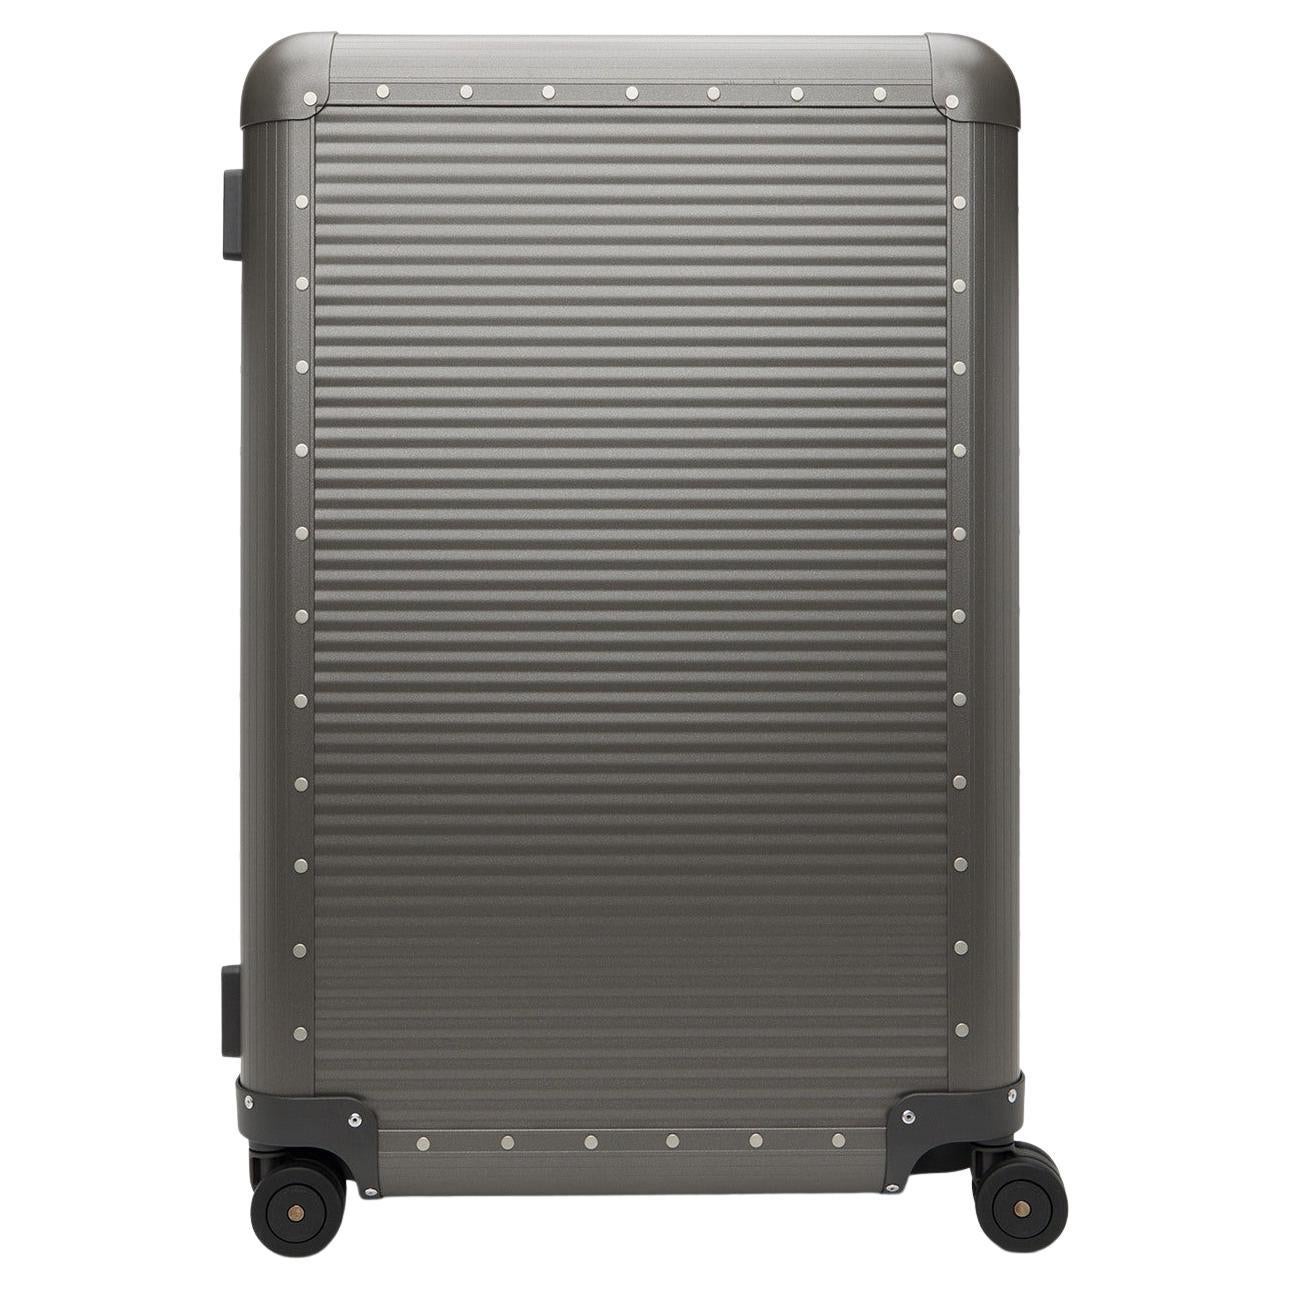 FPM MILANO
Gray Bank Spinner 76 Suitcase
Aluminum suitcase in gray.
· Adjustable telescoping handle at top
· Buffed leather carry handle at top and side
· Four dual wheels
· Hinged latch lock closures
· Integrated TSA key lock and combination